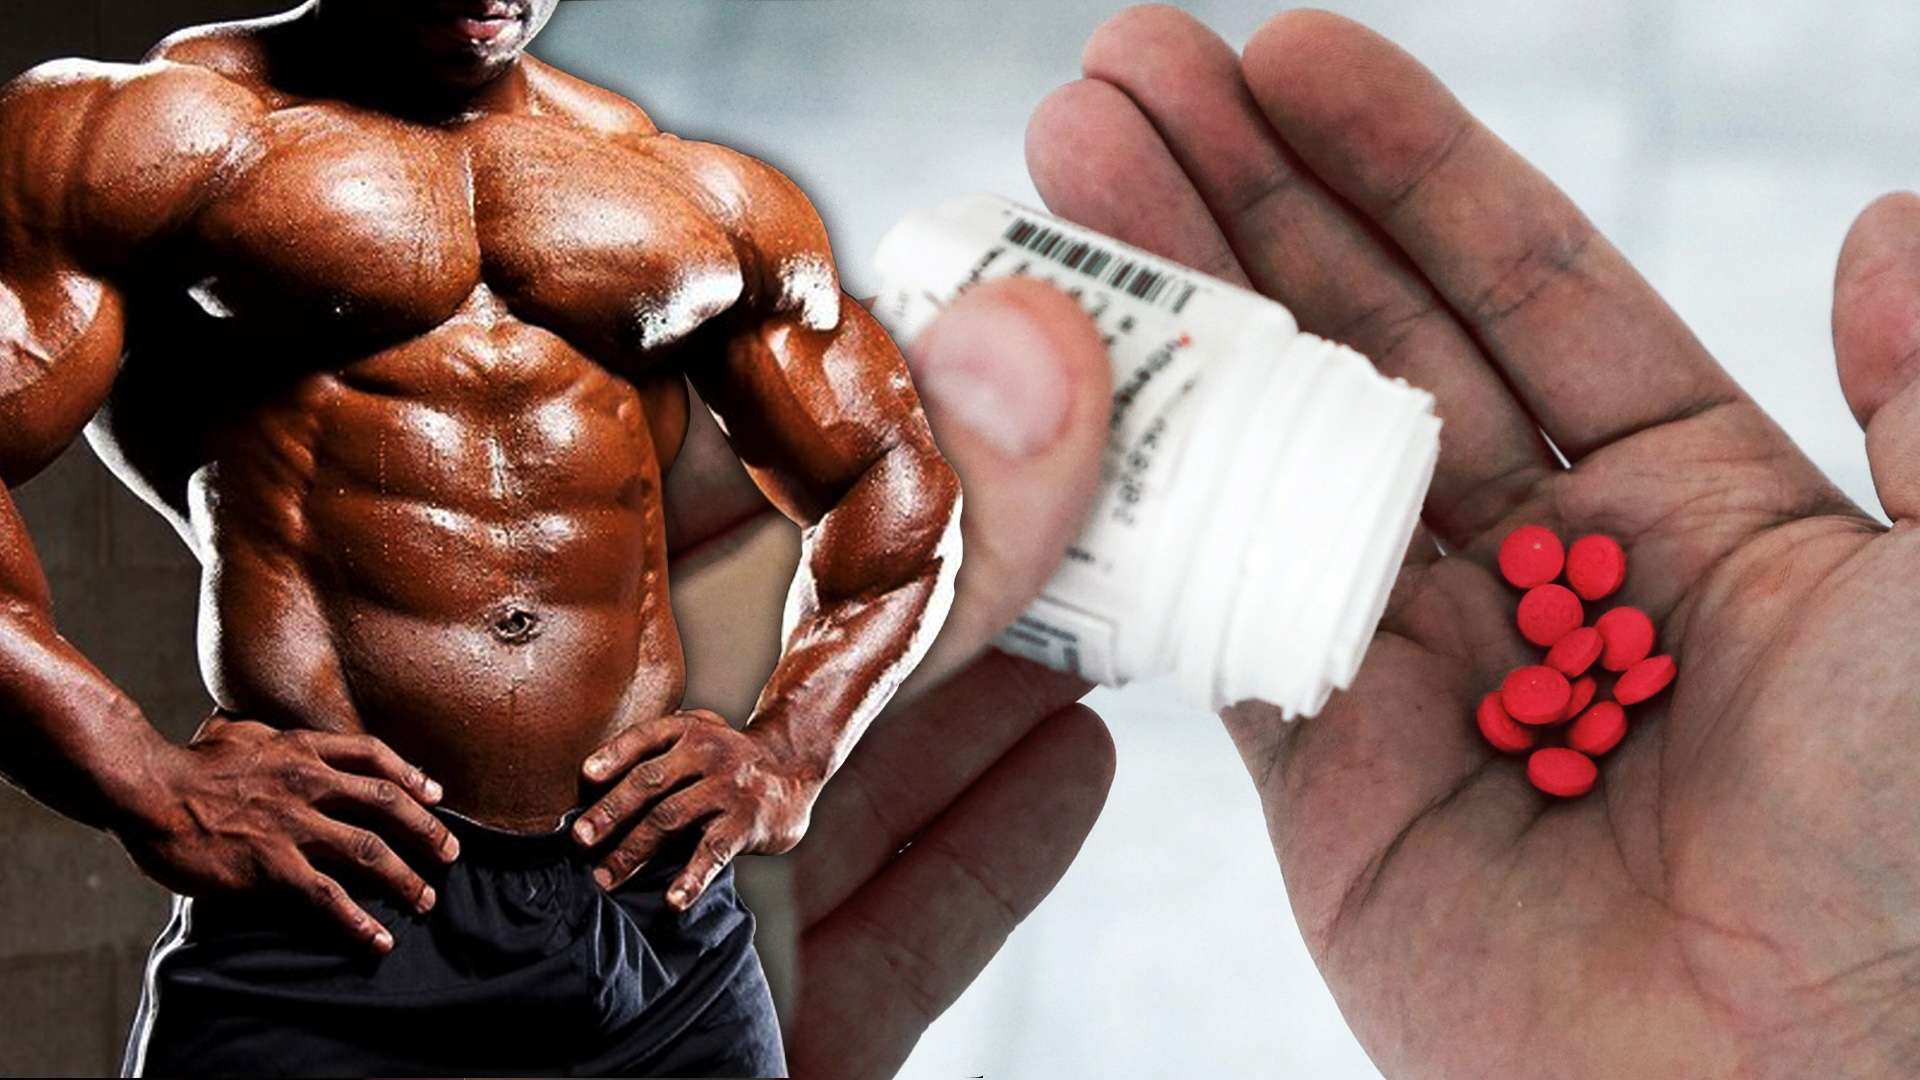 Should You Use An Oral Steroid During Your Bulk Cycle?